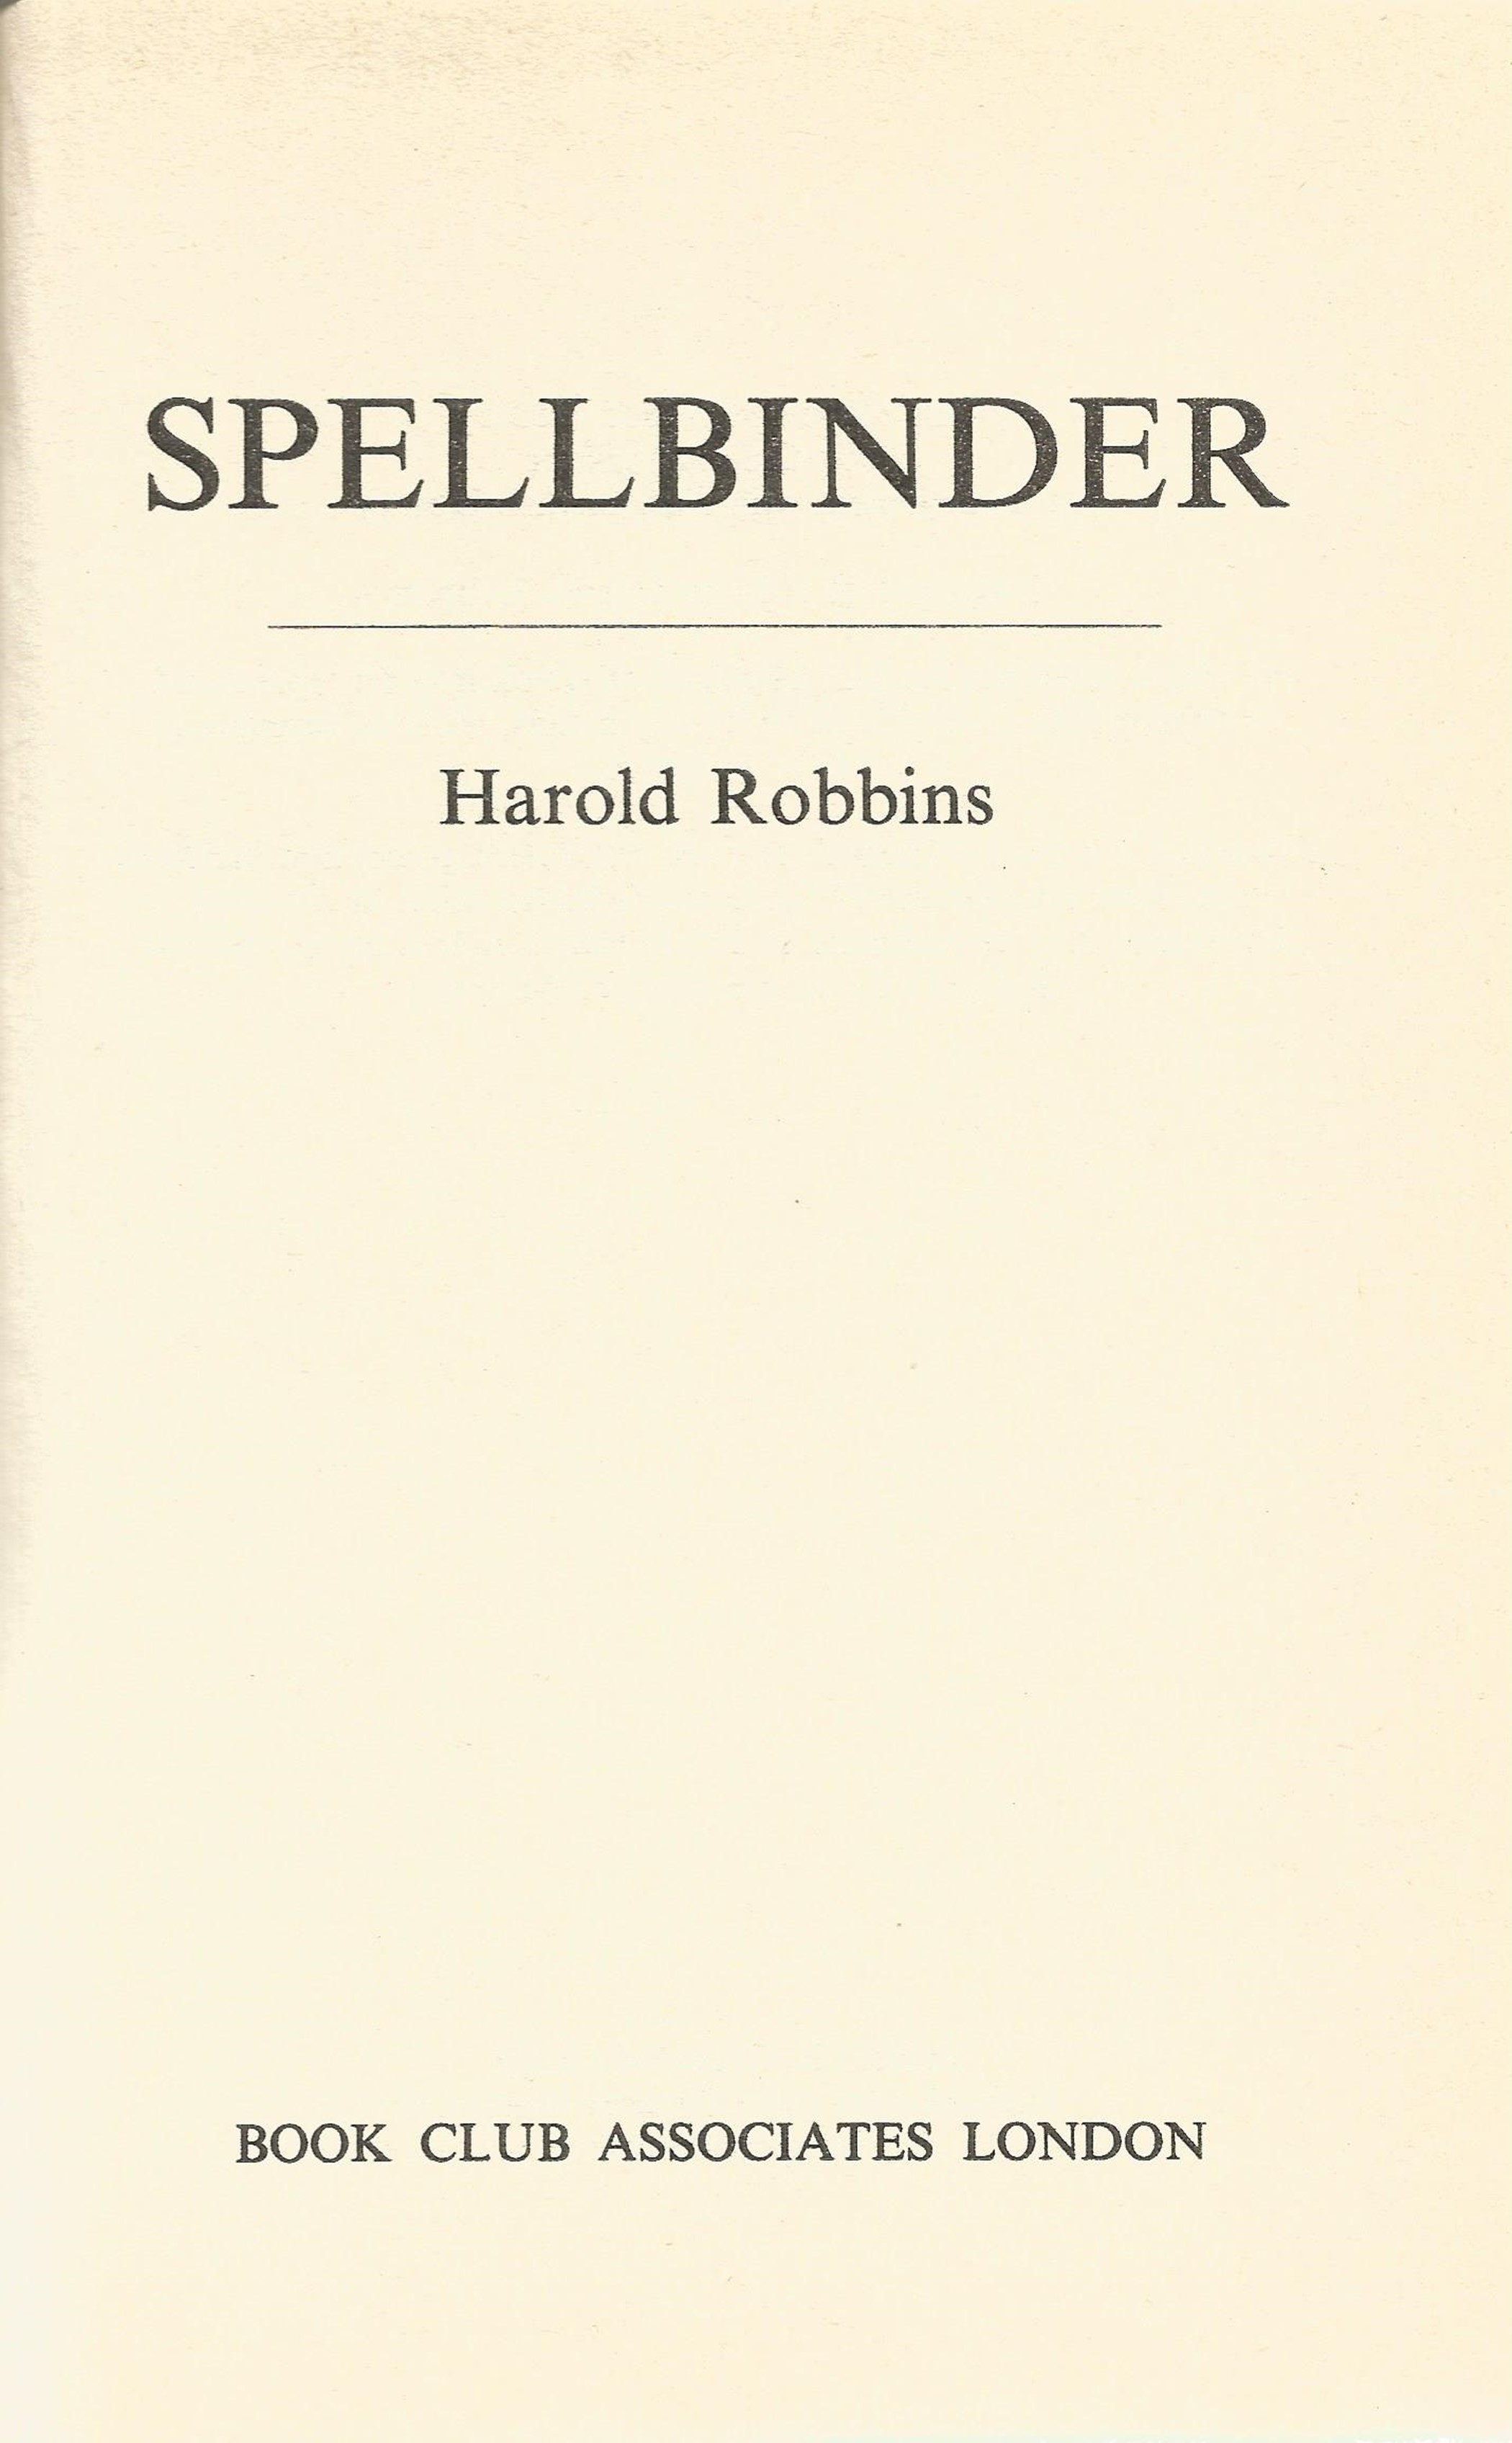 Spellbinder by Harold Robbins Hardback Book 1983 published by Book Club Associates slight ageing - Image 2 of 3